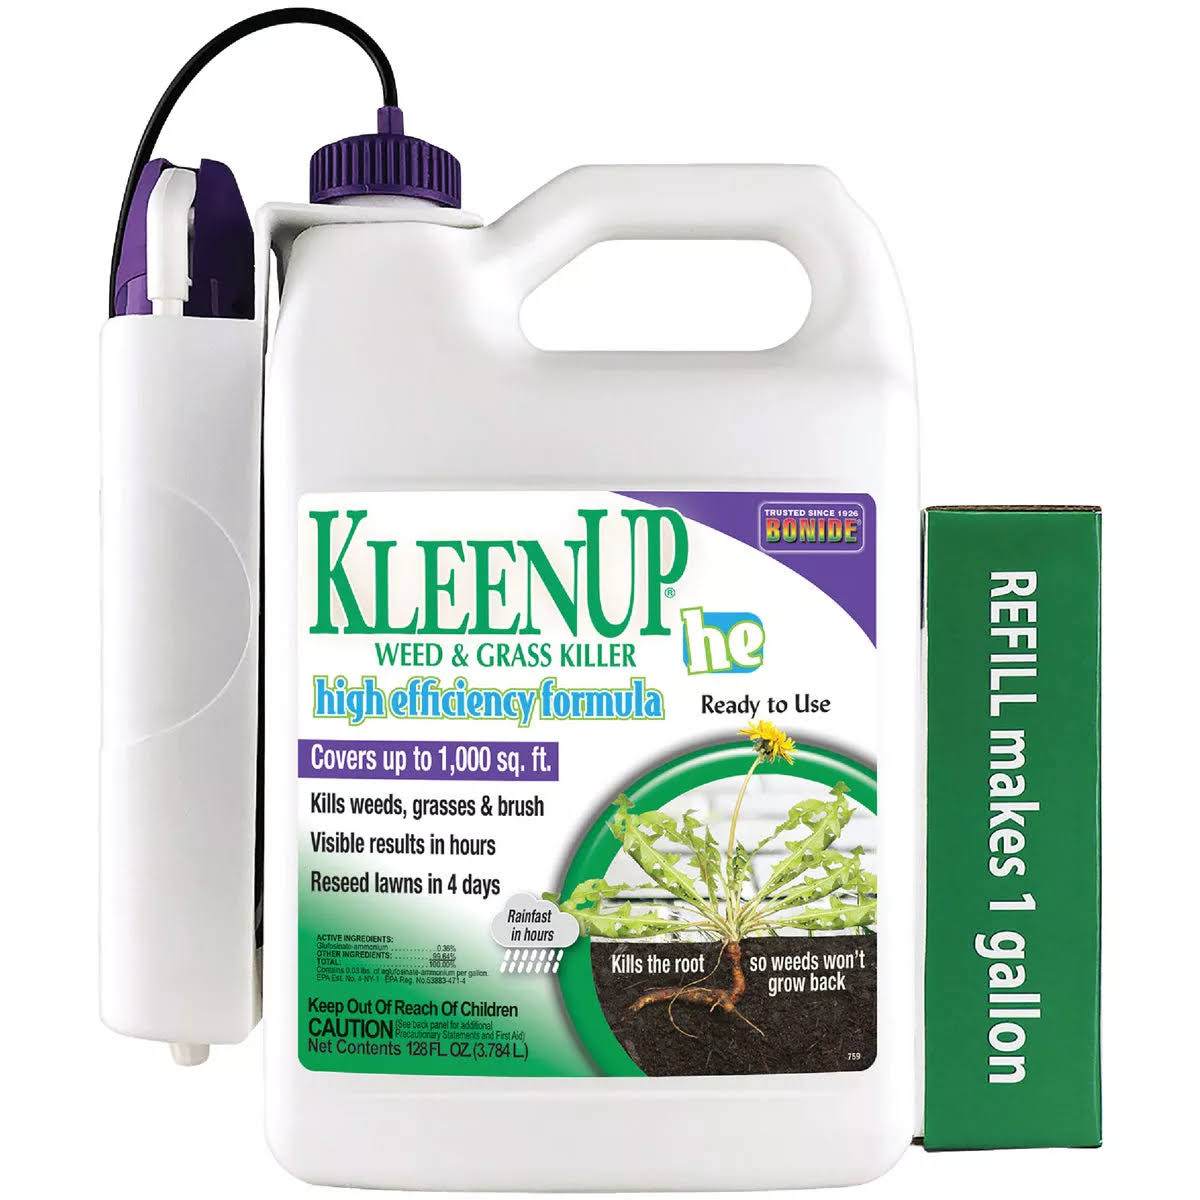 Bonide KleenUP 759 Weed and Grass Killer Ready-to-Use with Power Wand, Liquid, Off-White/Yellow, 1 Gal 3 Pack